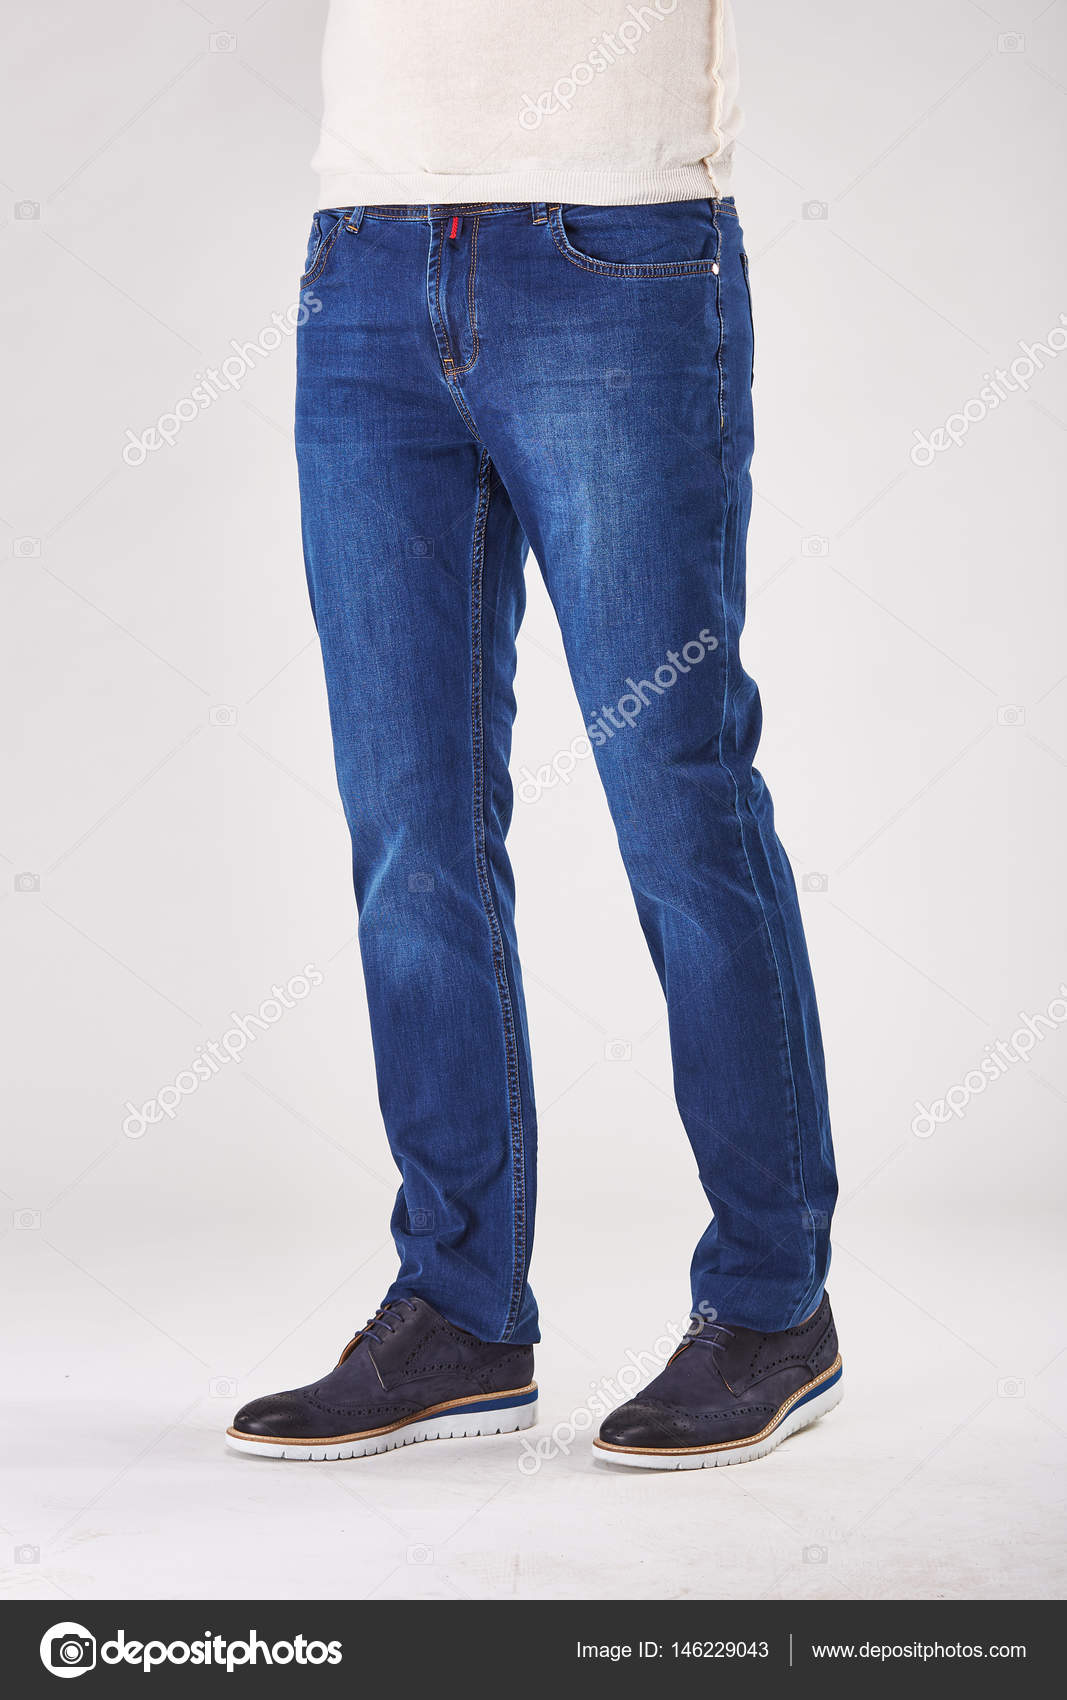 blue jeans and black shoes